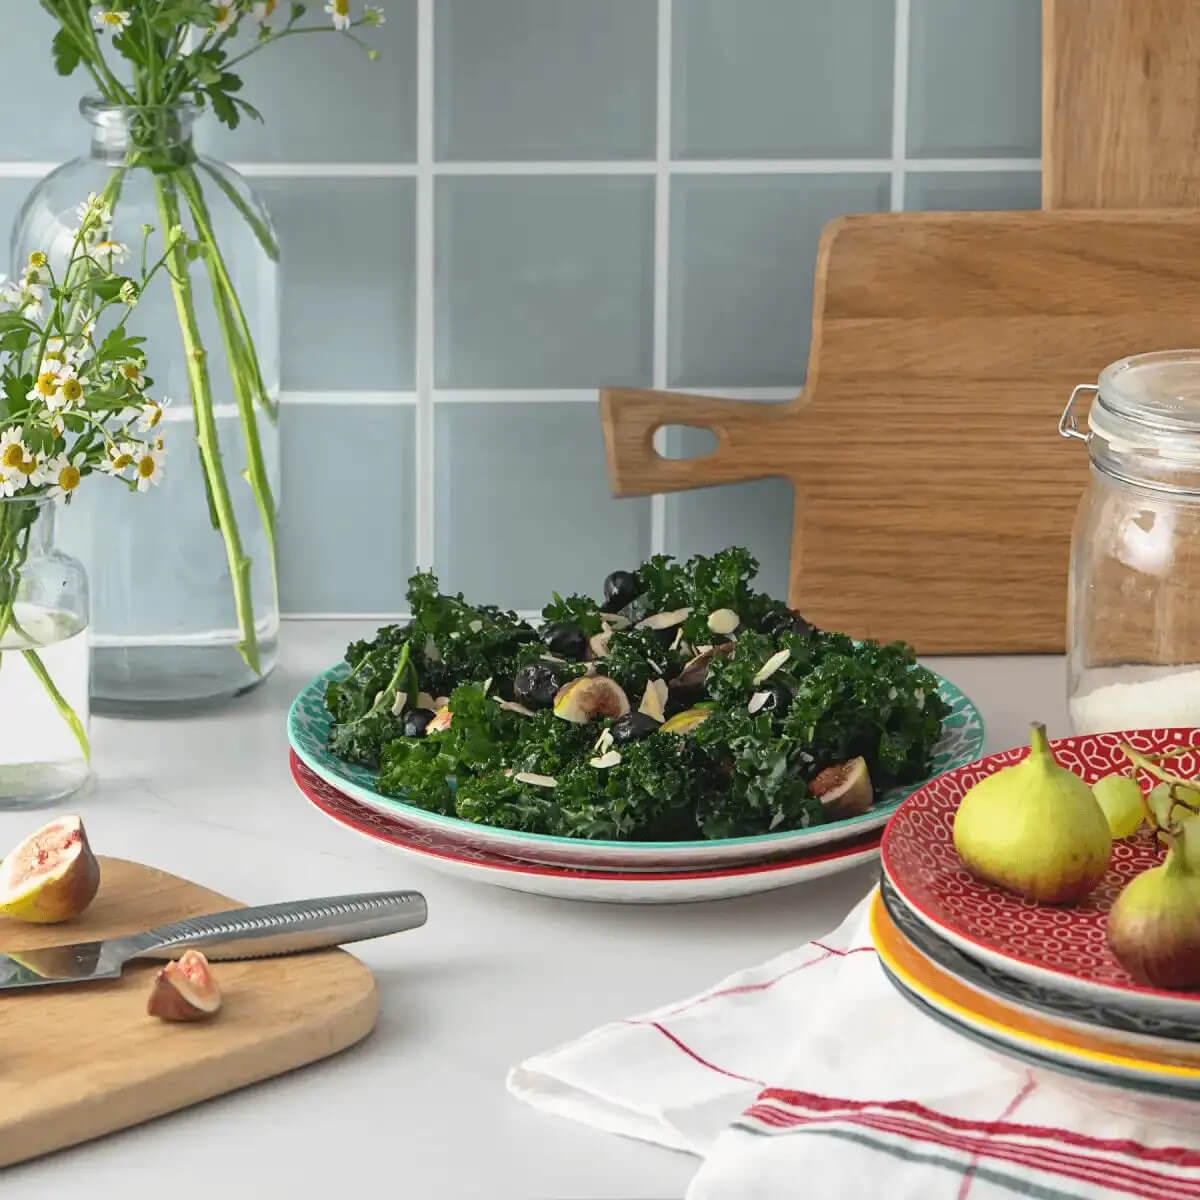 Impress Your Guests with Dowan's Ceramic Dinner Sets